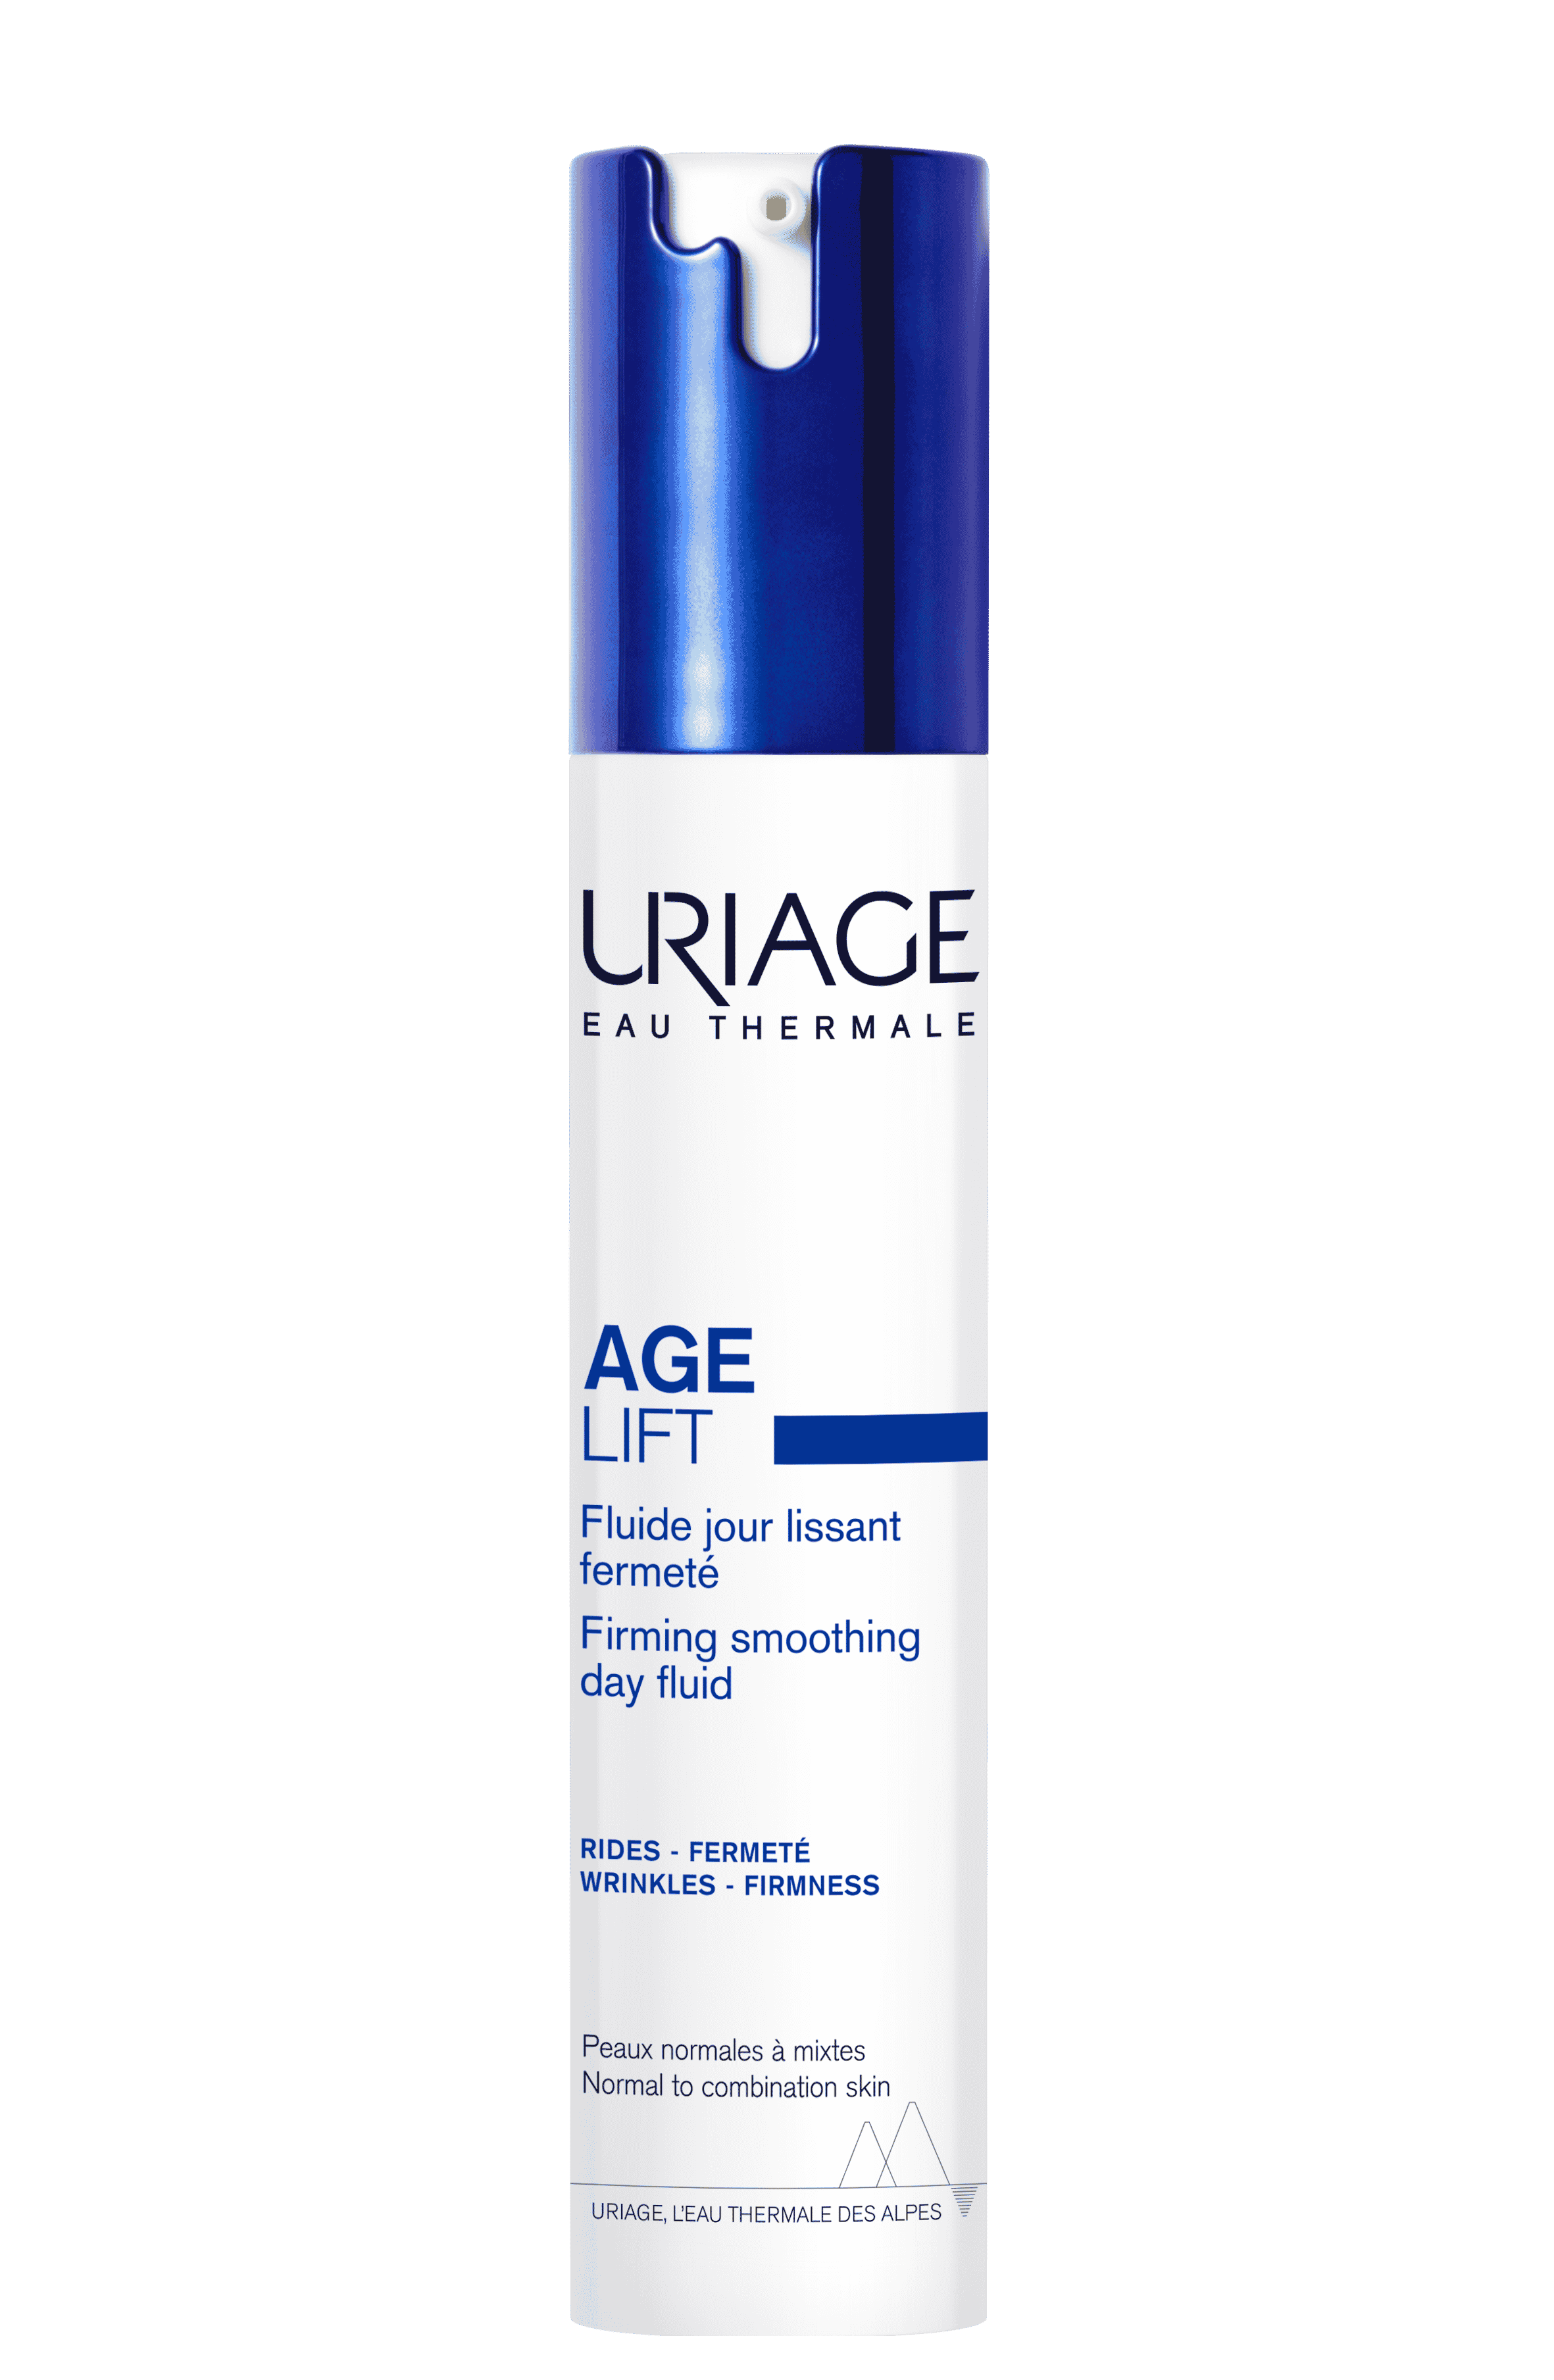 Uriage Age Lift Firming Smoothing Day Fluid Cream 40ml